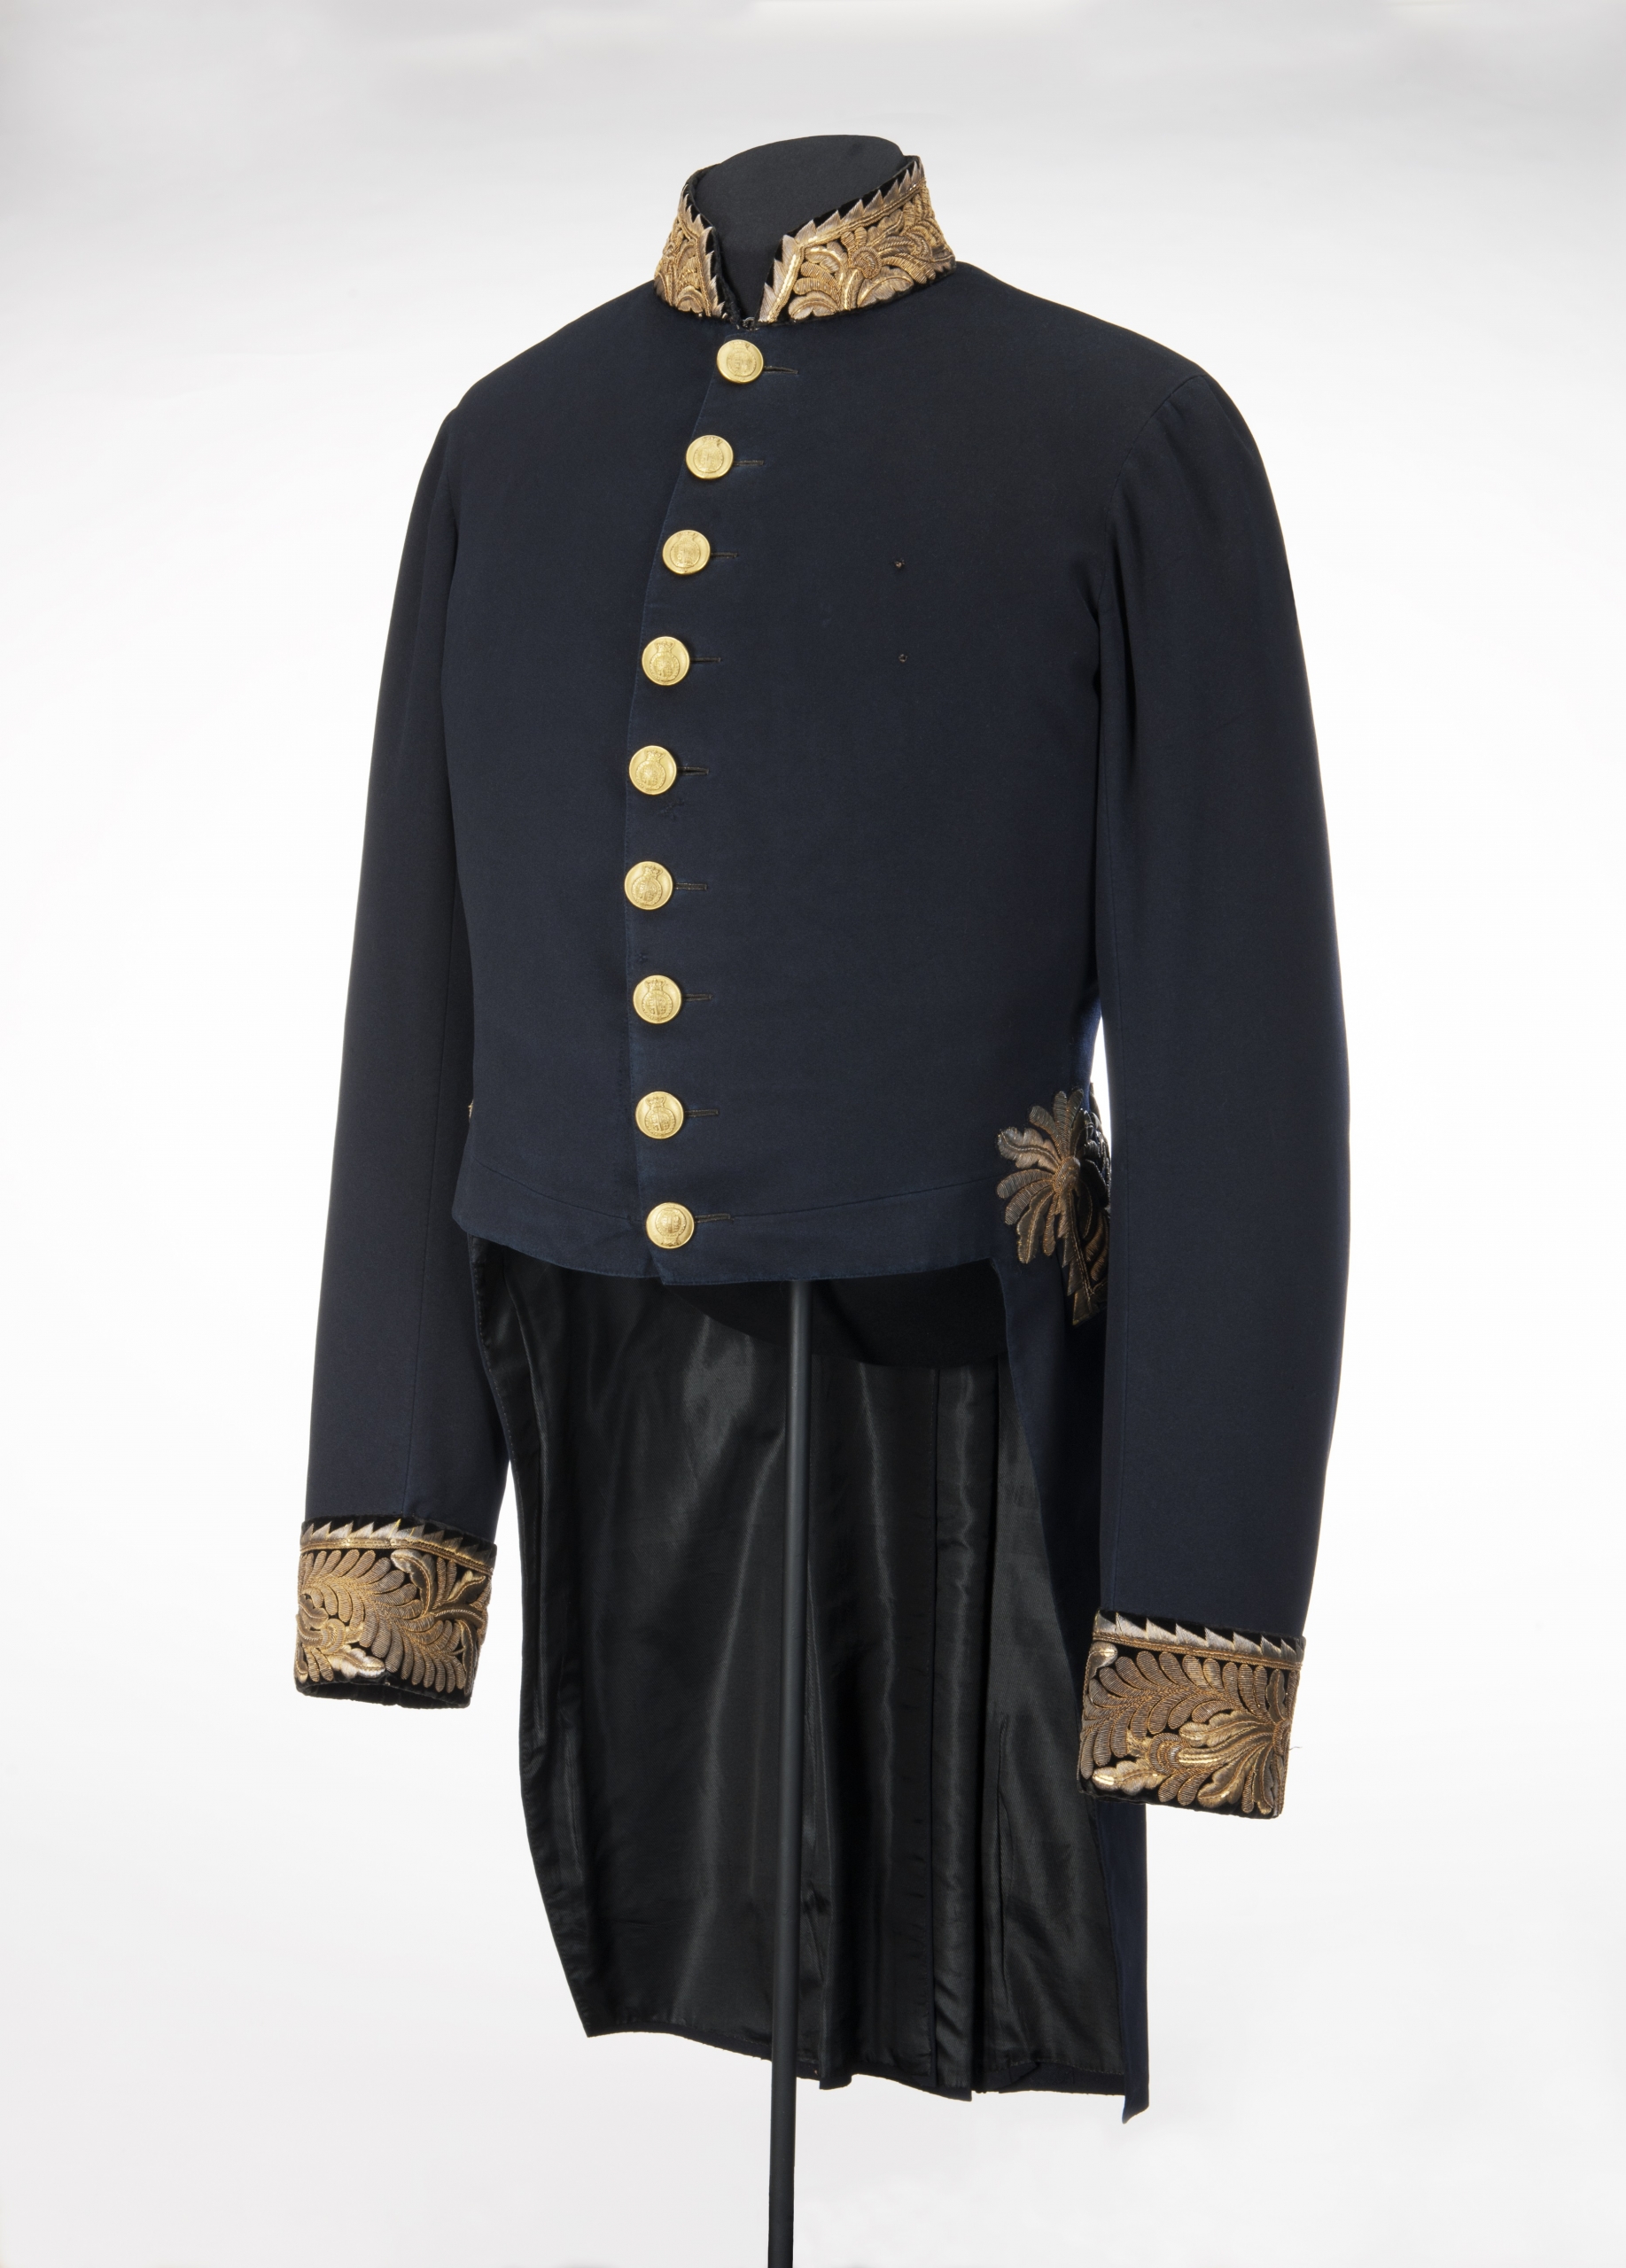 blue civil uniform jacket with gold cuffs and buttons.